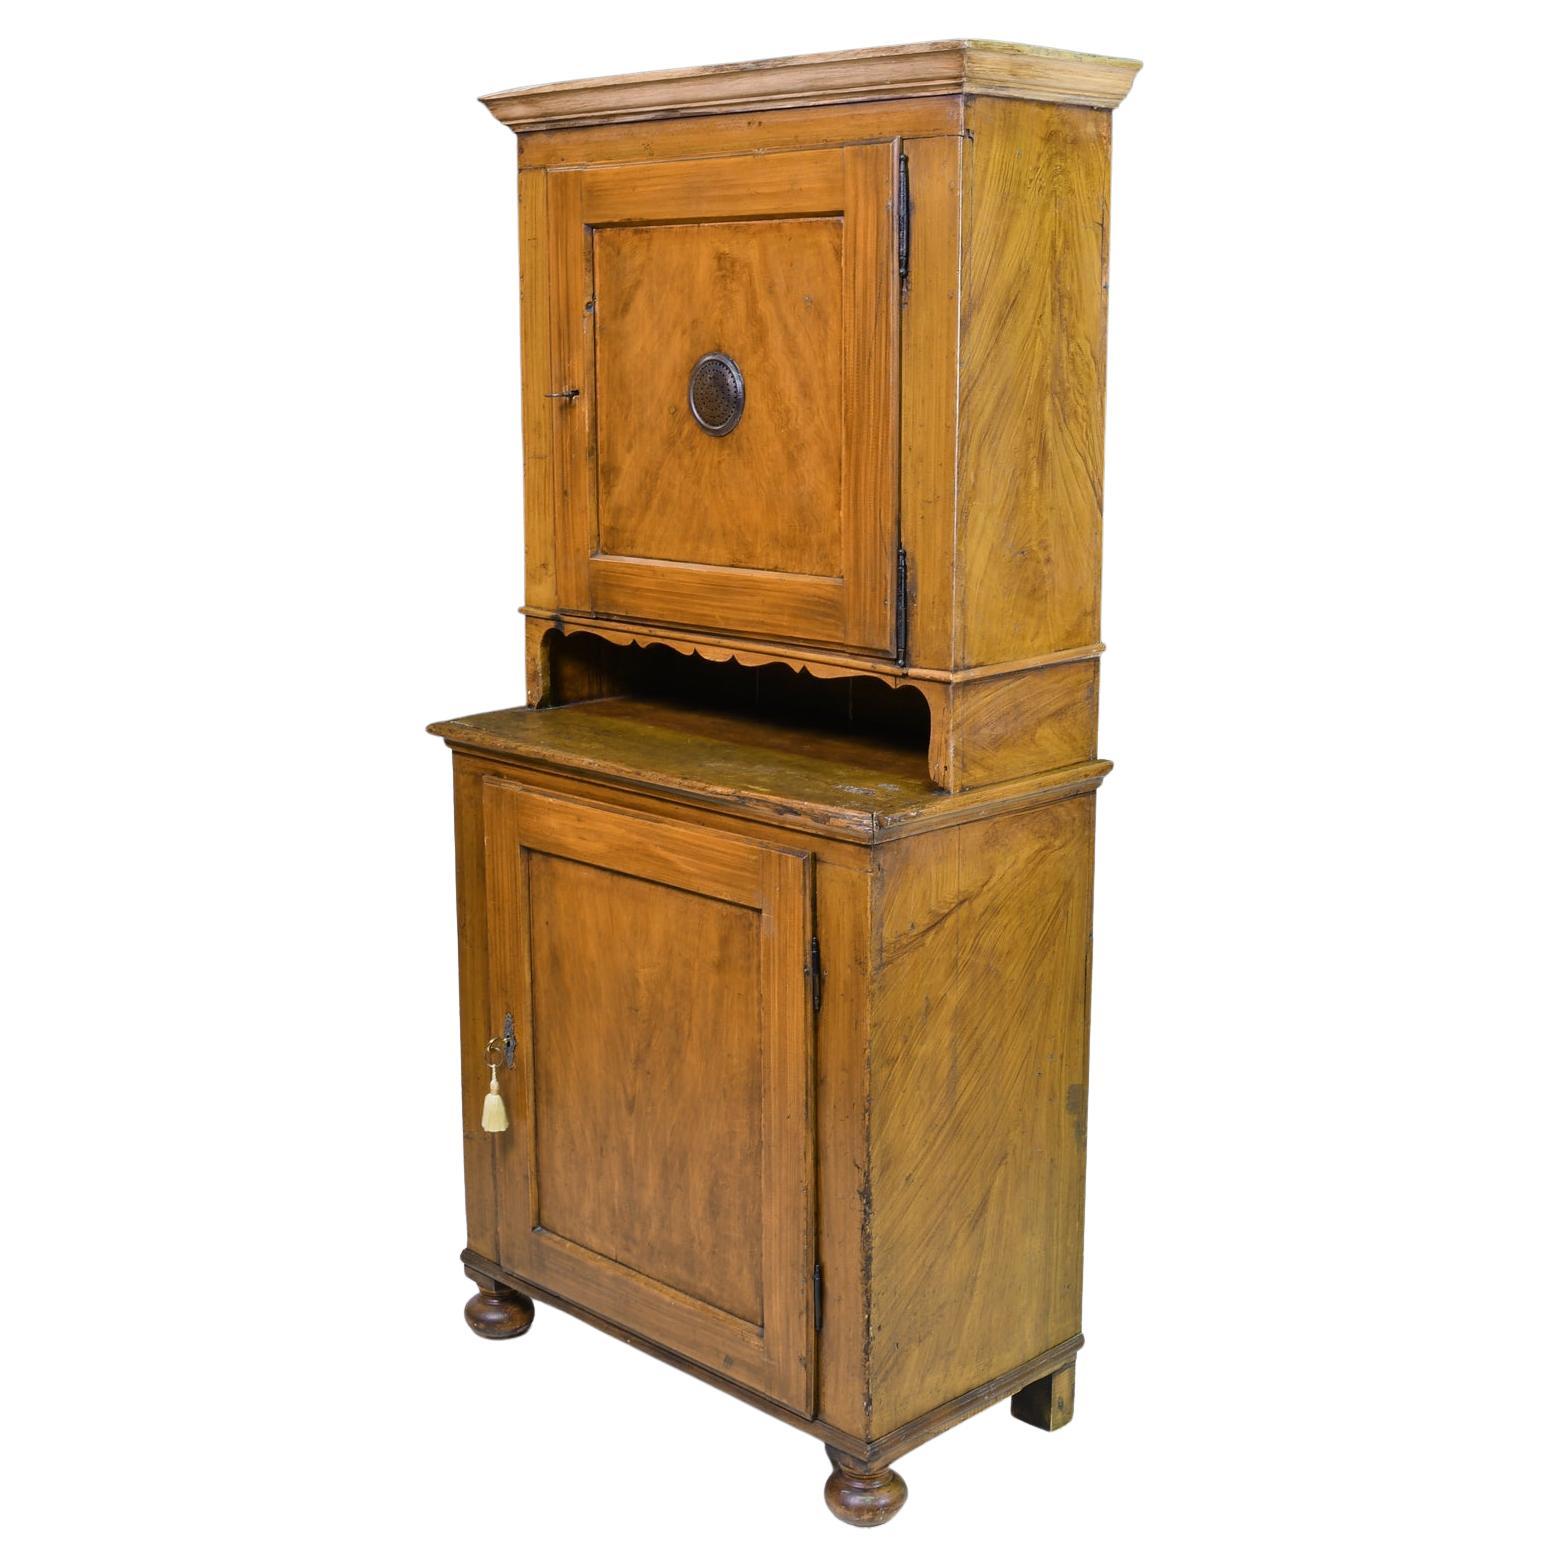 Country Antique Provincial Cupboard with Original Faux-Bois Painted Finish, c. 1830 For Sale